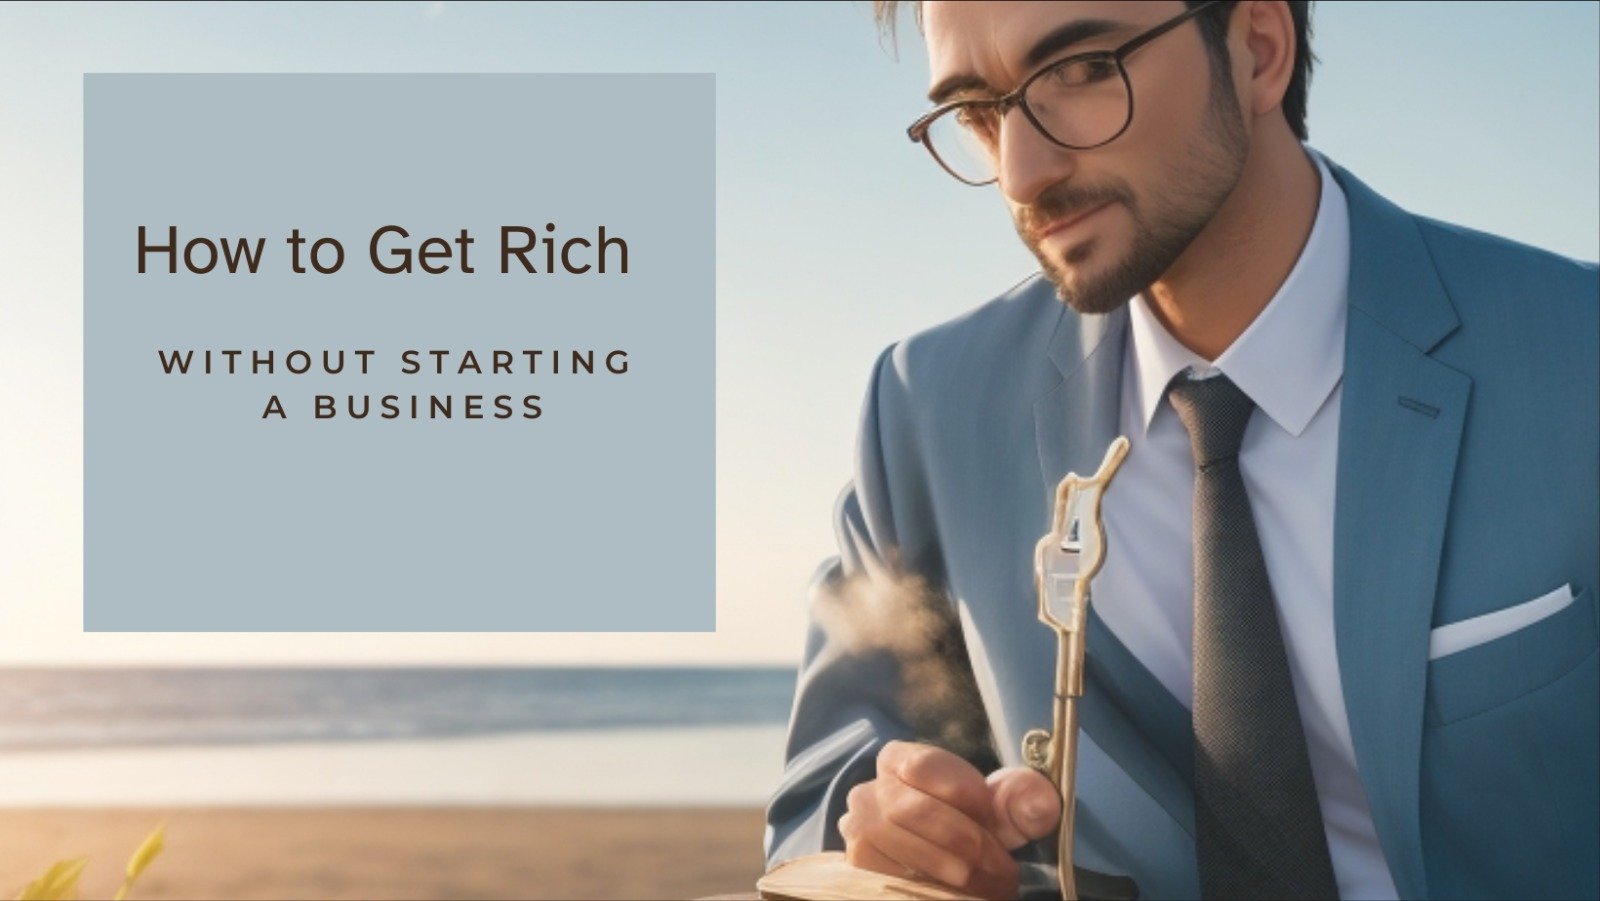 How to Get Rich Without Starting a Business